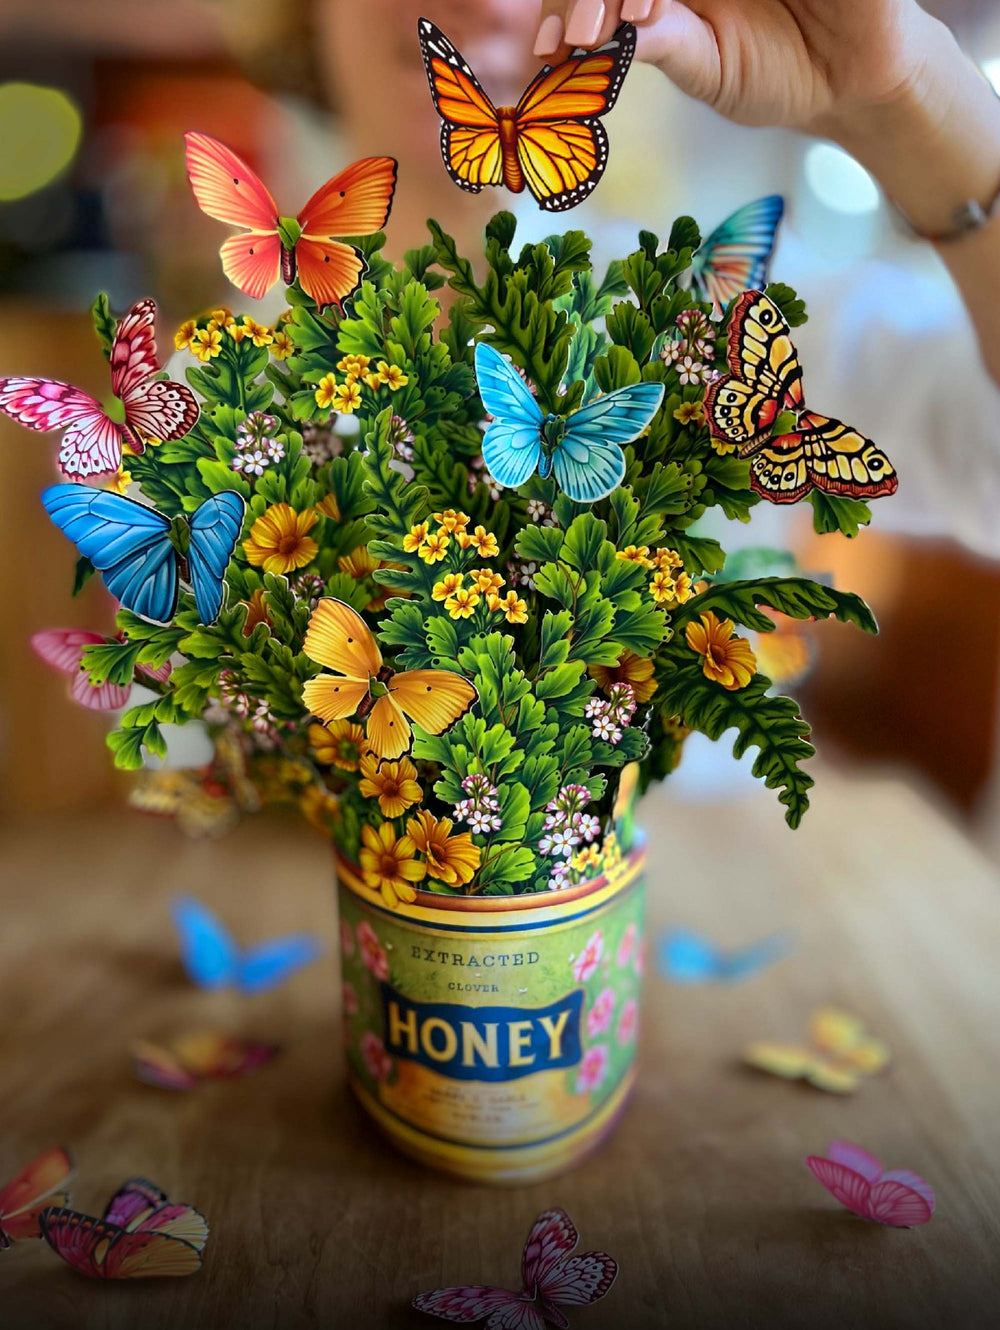 Our FreshCut Paper Butterflies and Buttercups come ready to present in their own festive honey vase. More than a greeting card, our flowers are always FreshCut Paper that never wilt, fade or require water.